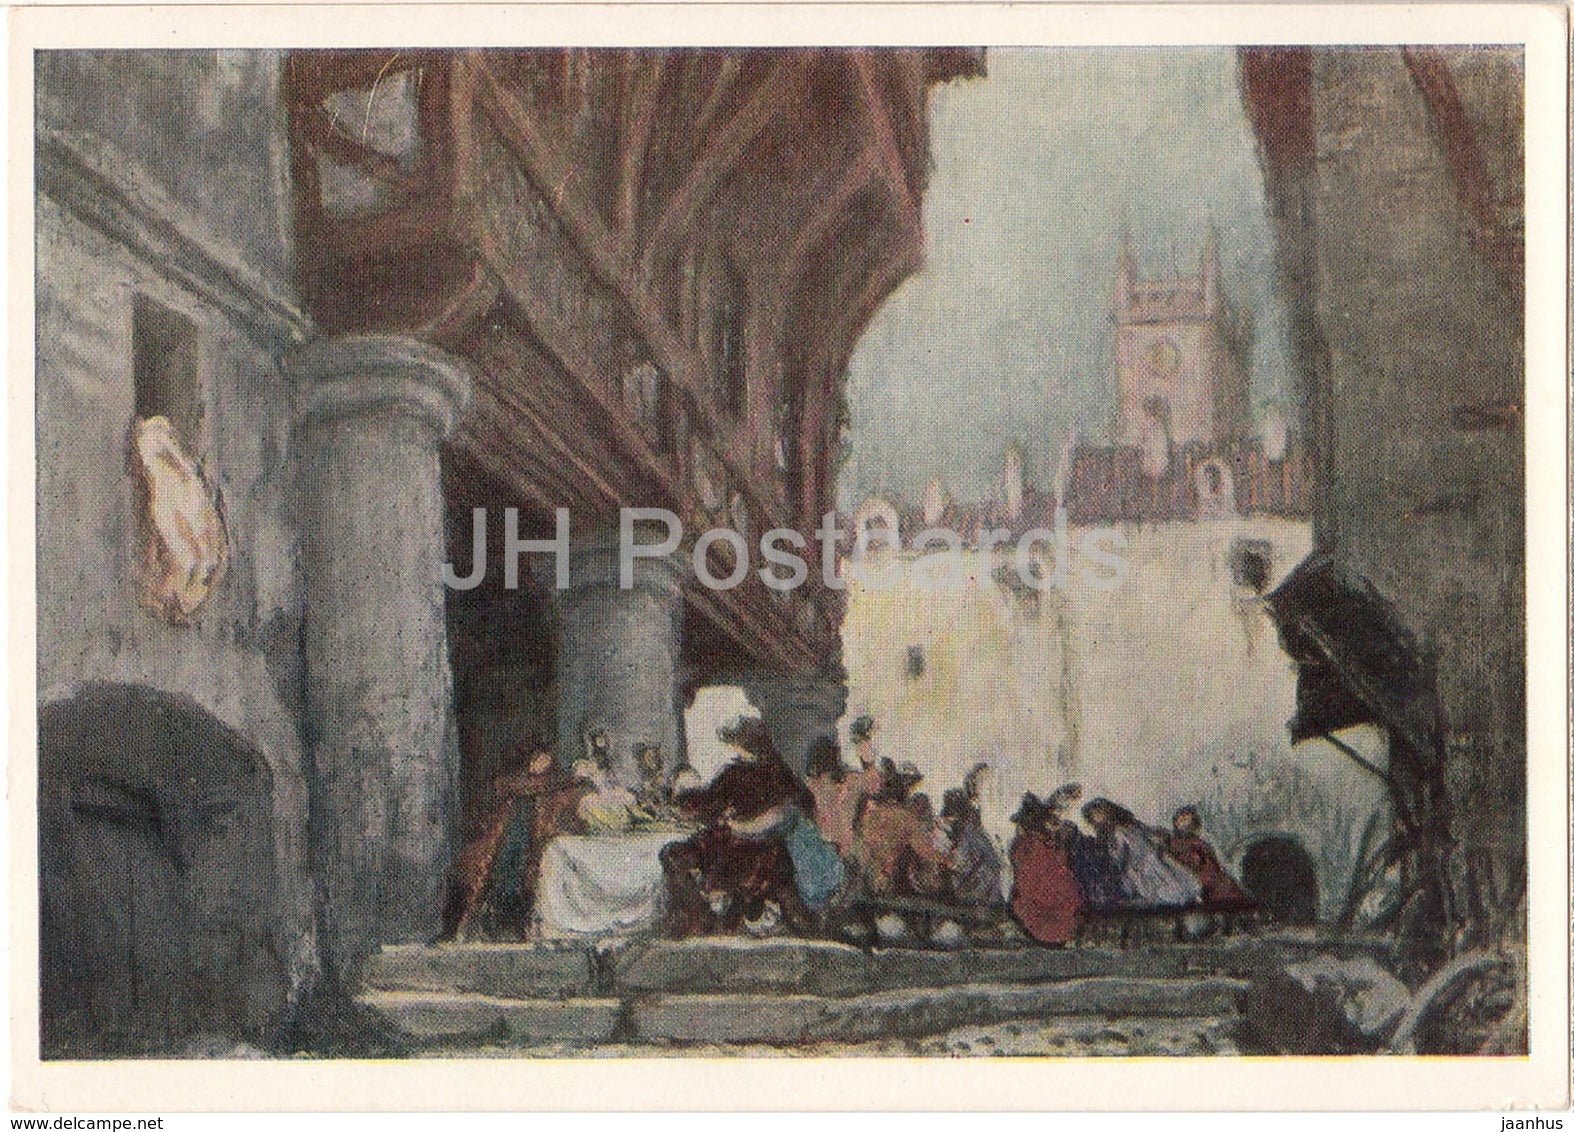 painting by Alexandre Benois - a sketch of scenery Feast during the Plague - Russian art - 1971 - Russia USSR - unused - JH Postcards